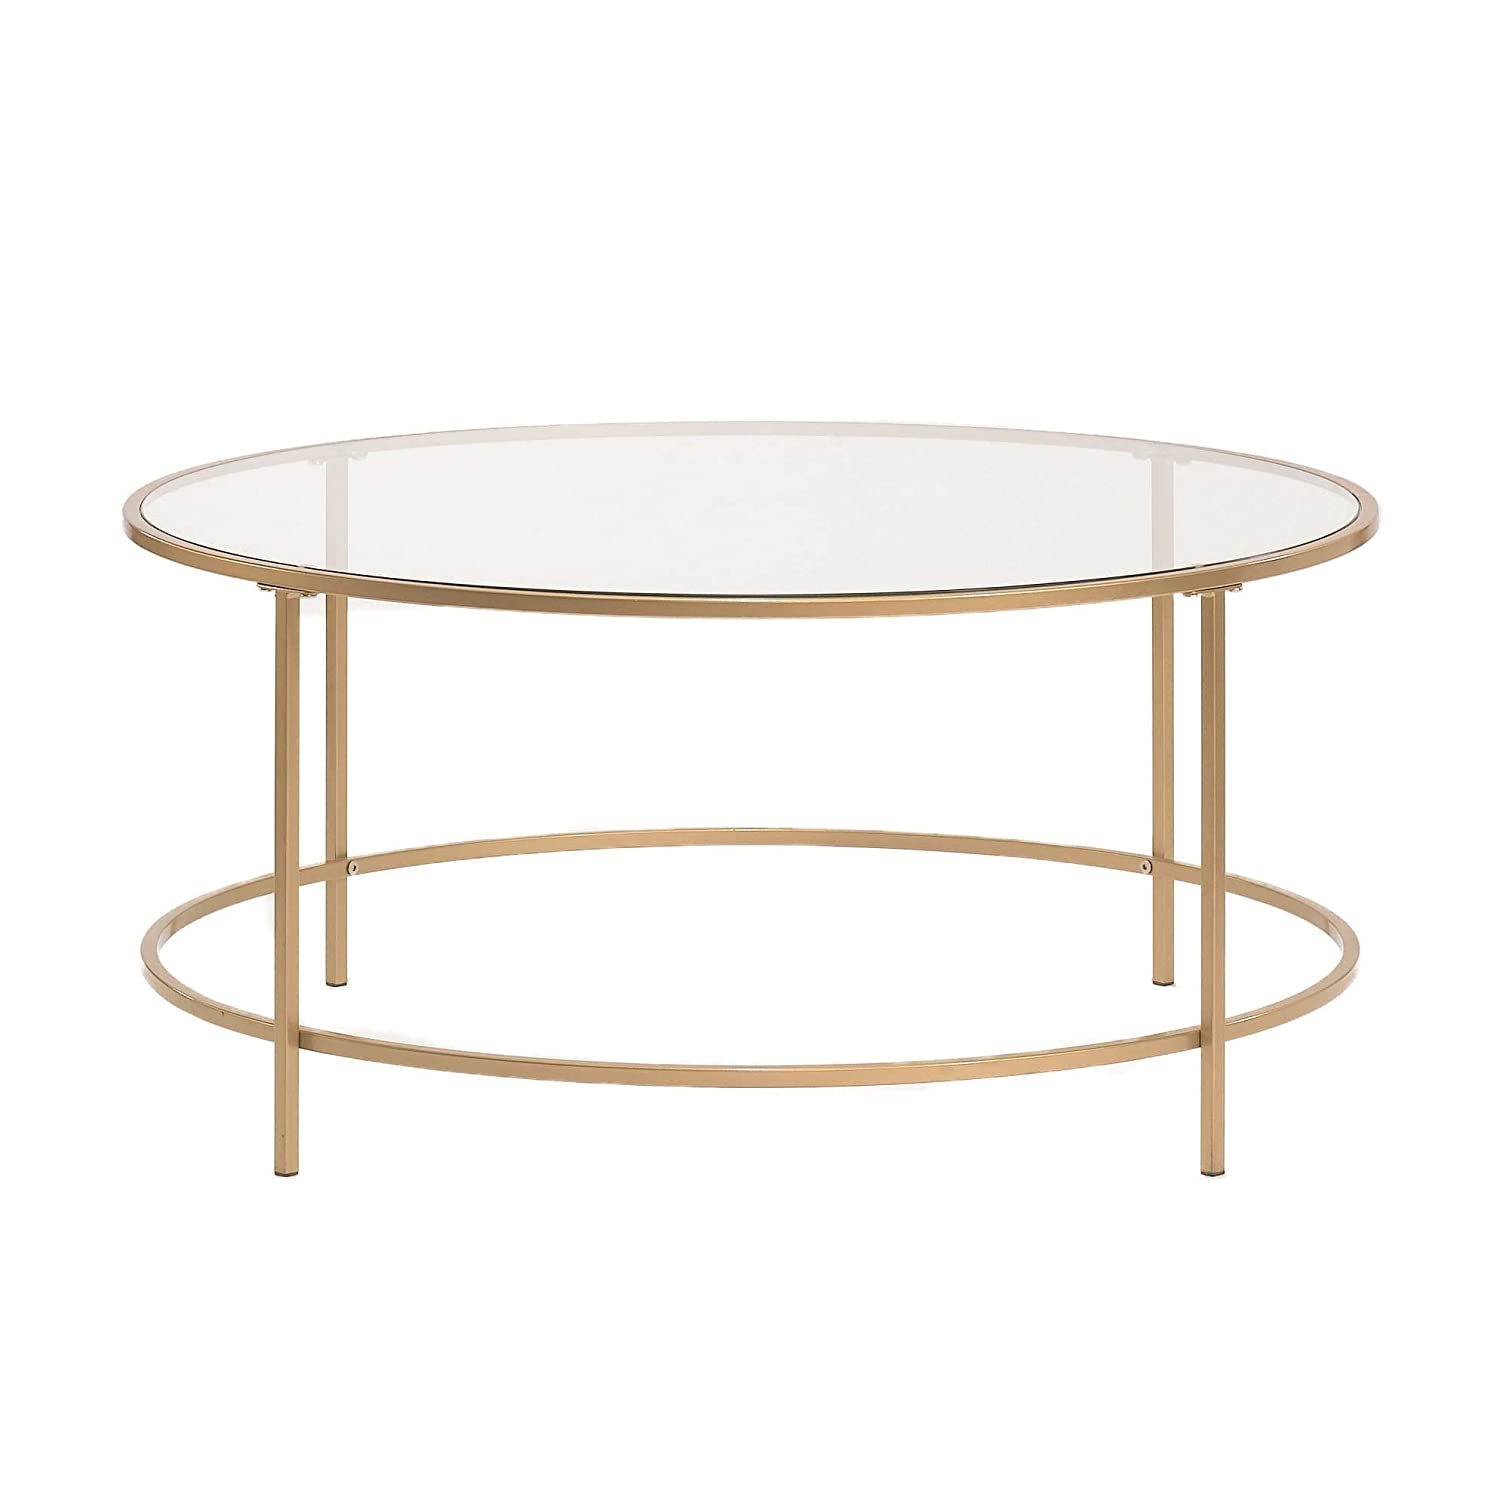 Sauder 417830 Int Lux Coffee Table Round, Glass / Gold Finish - $190.99